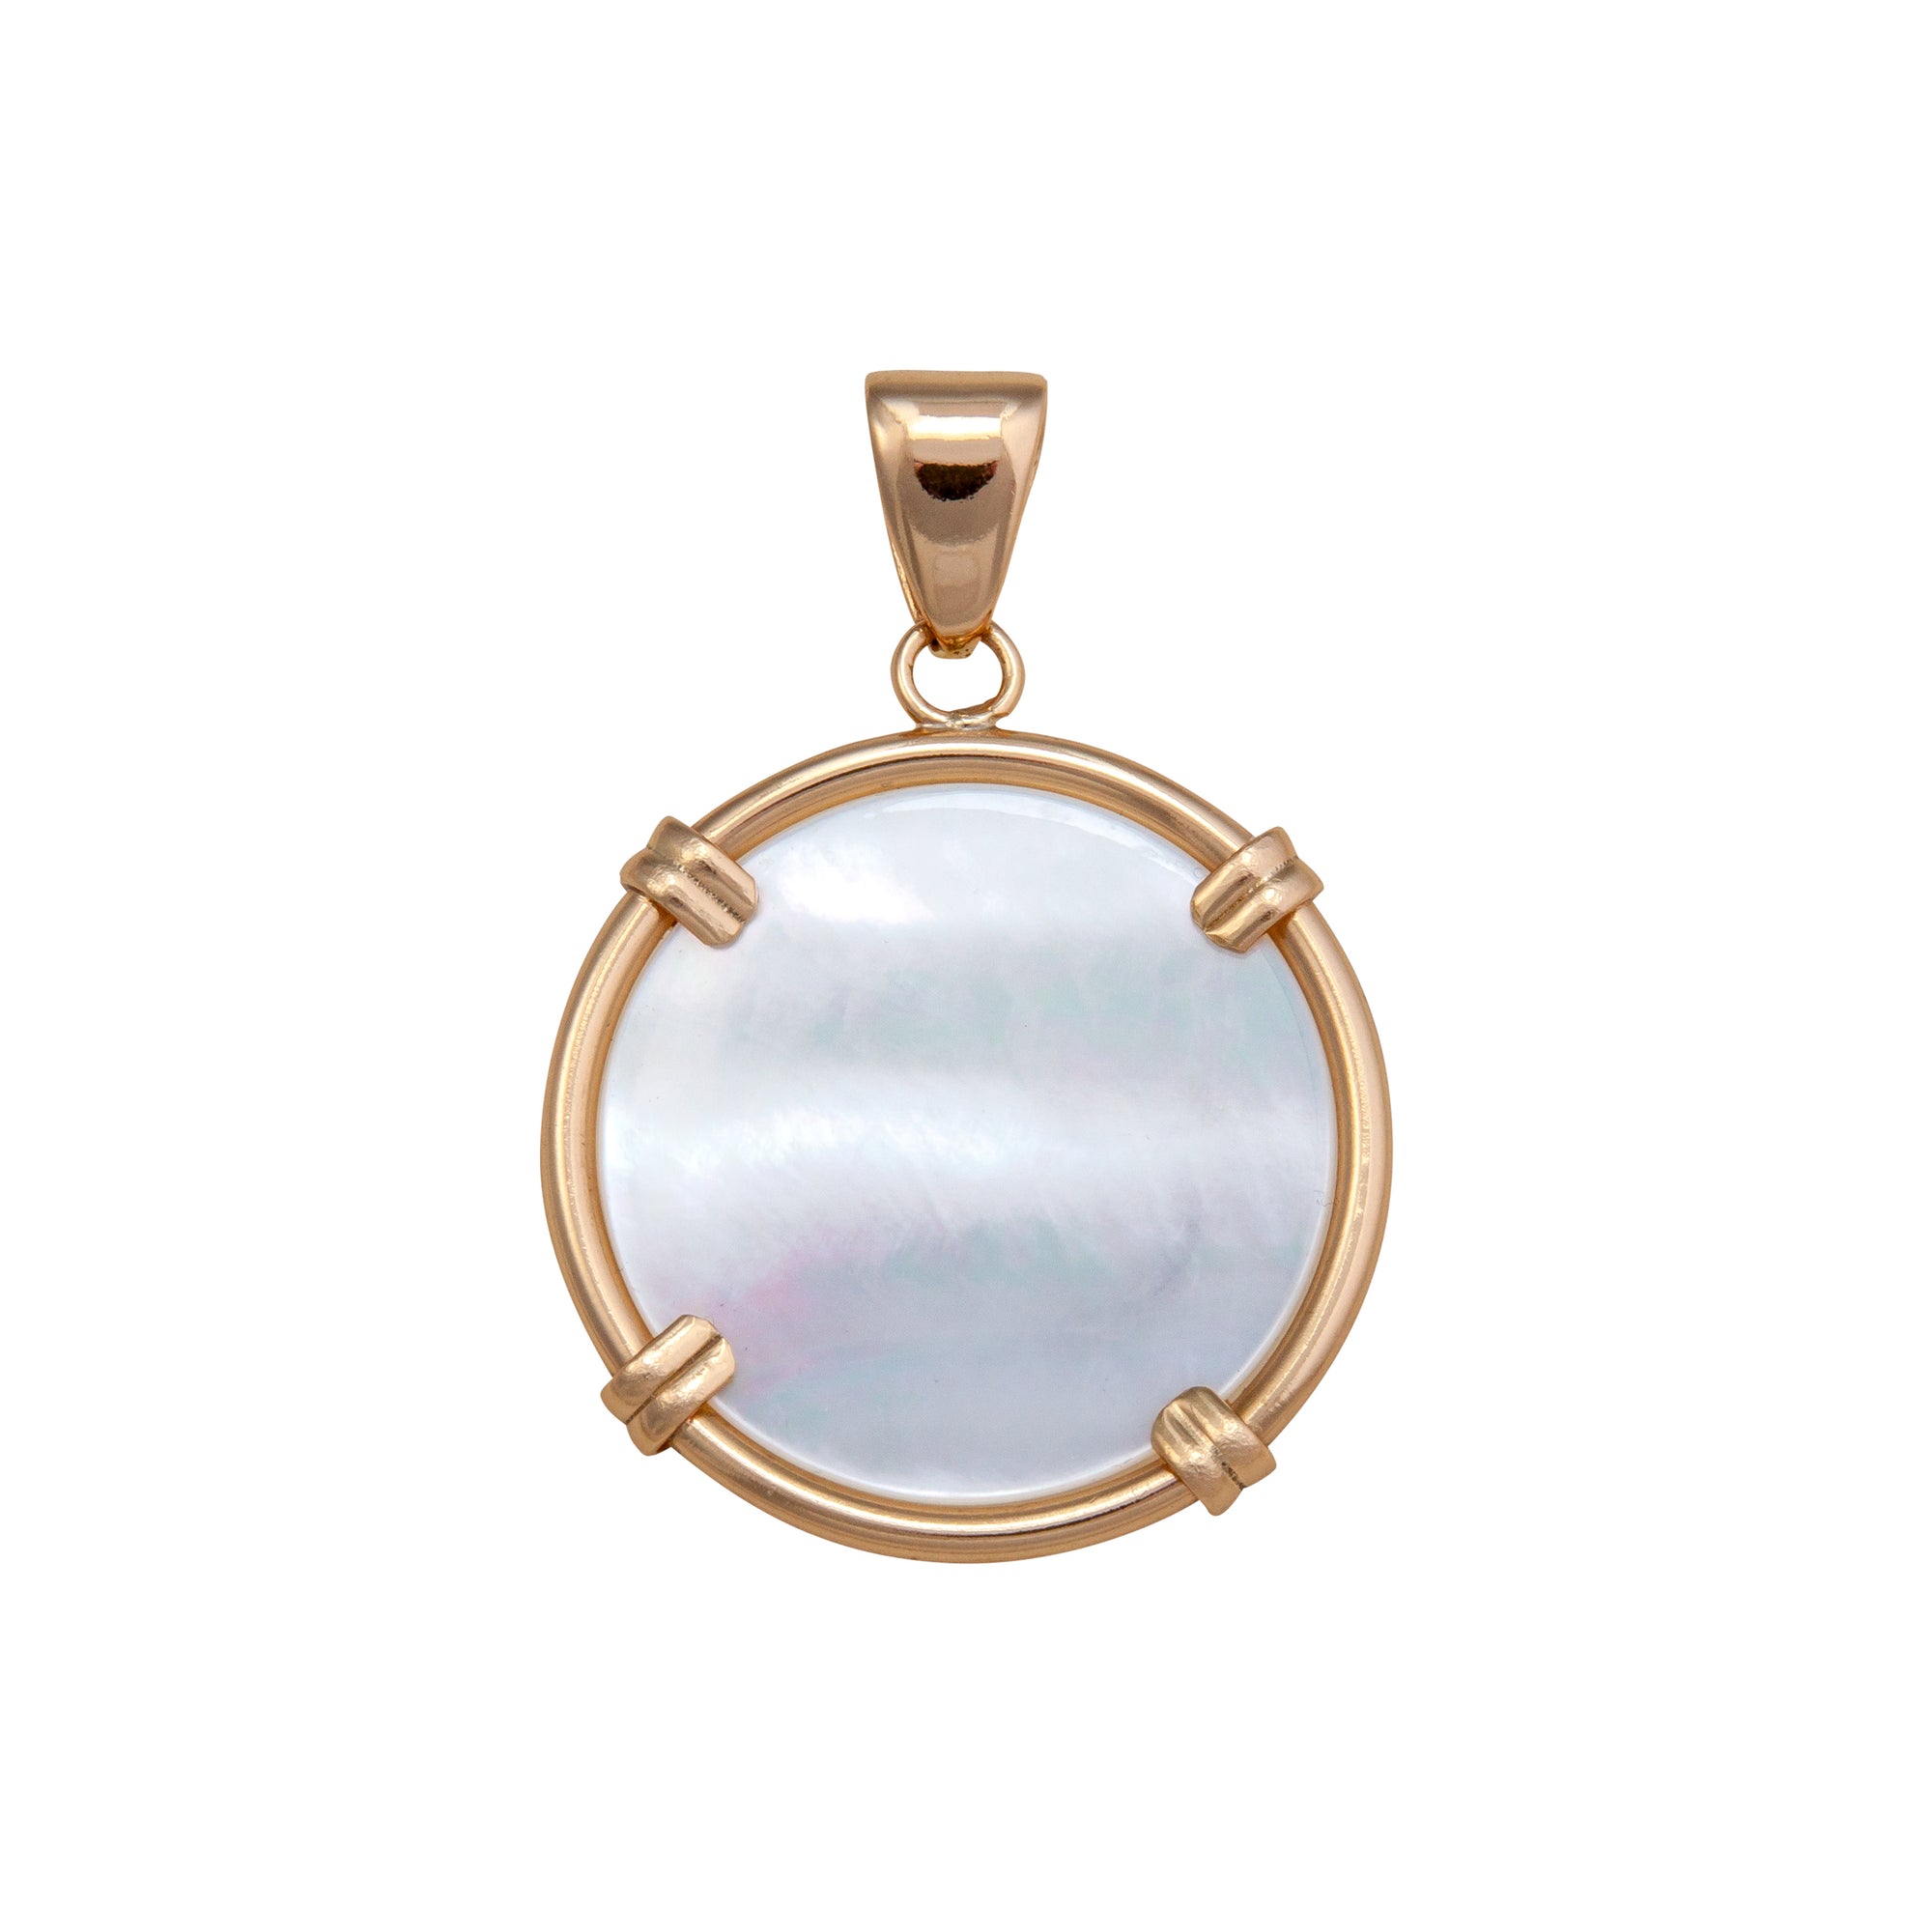 Alchemia Mother of Pearl Prong Pendant \ Charles Albert Jewelry